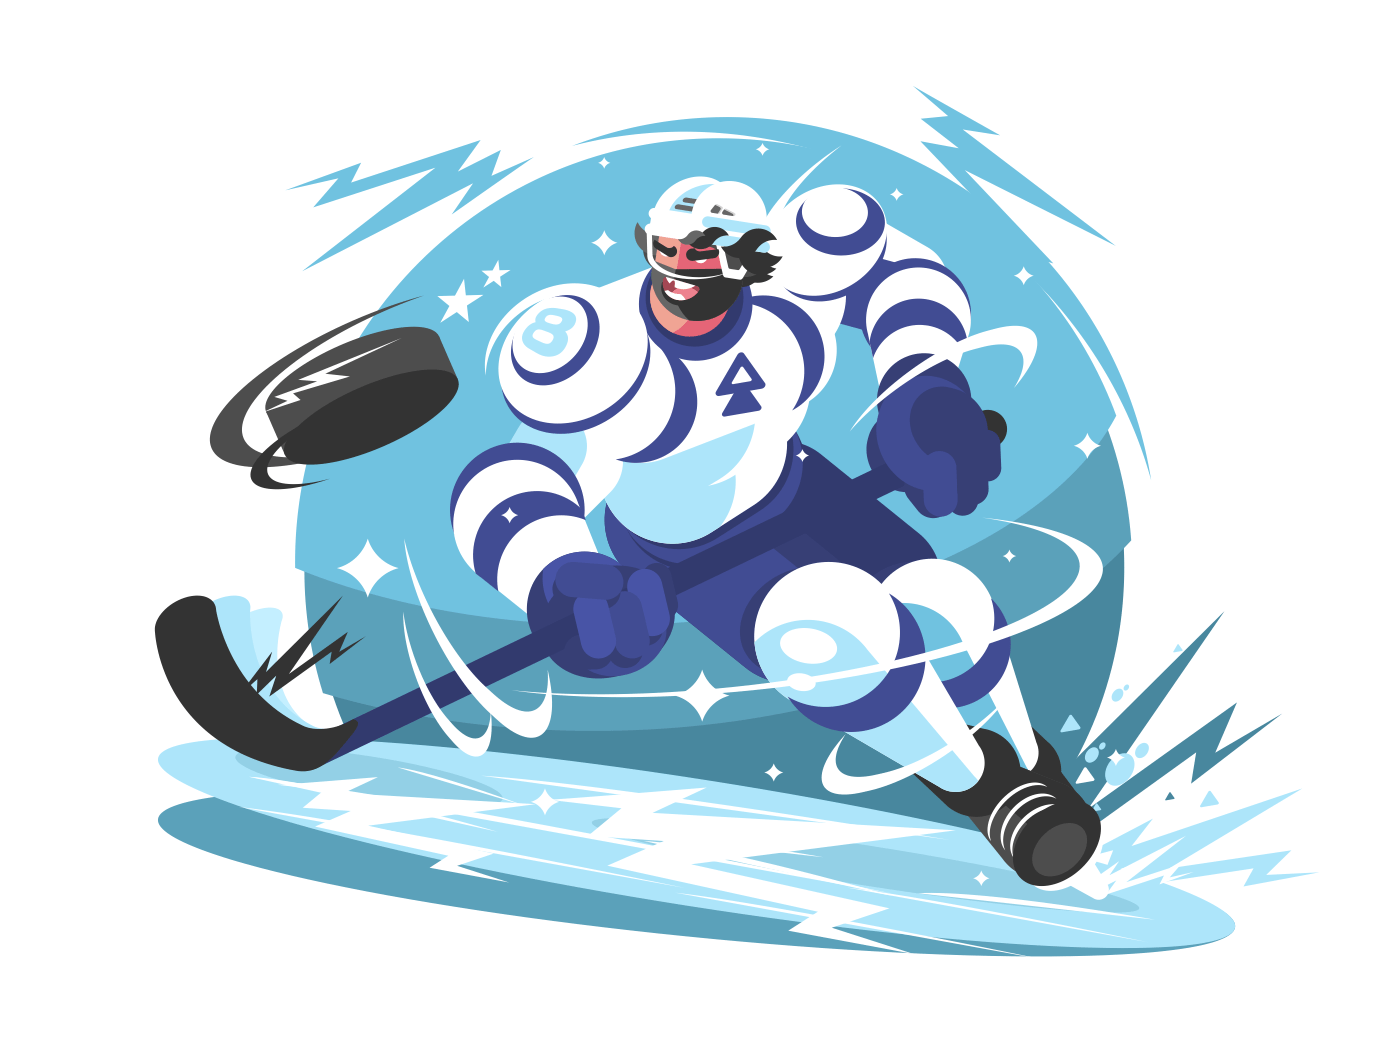 Ice hockey team player with stick and puck. Vector illustration